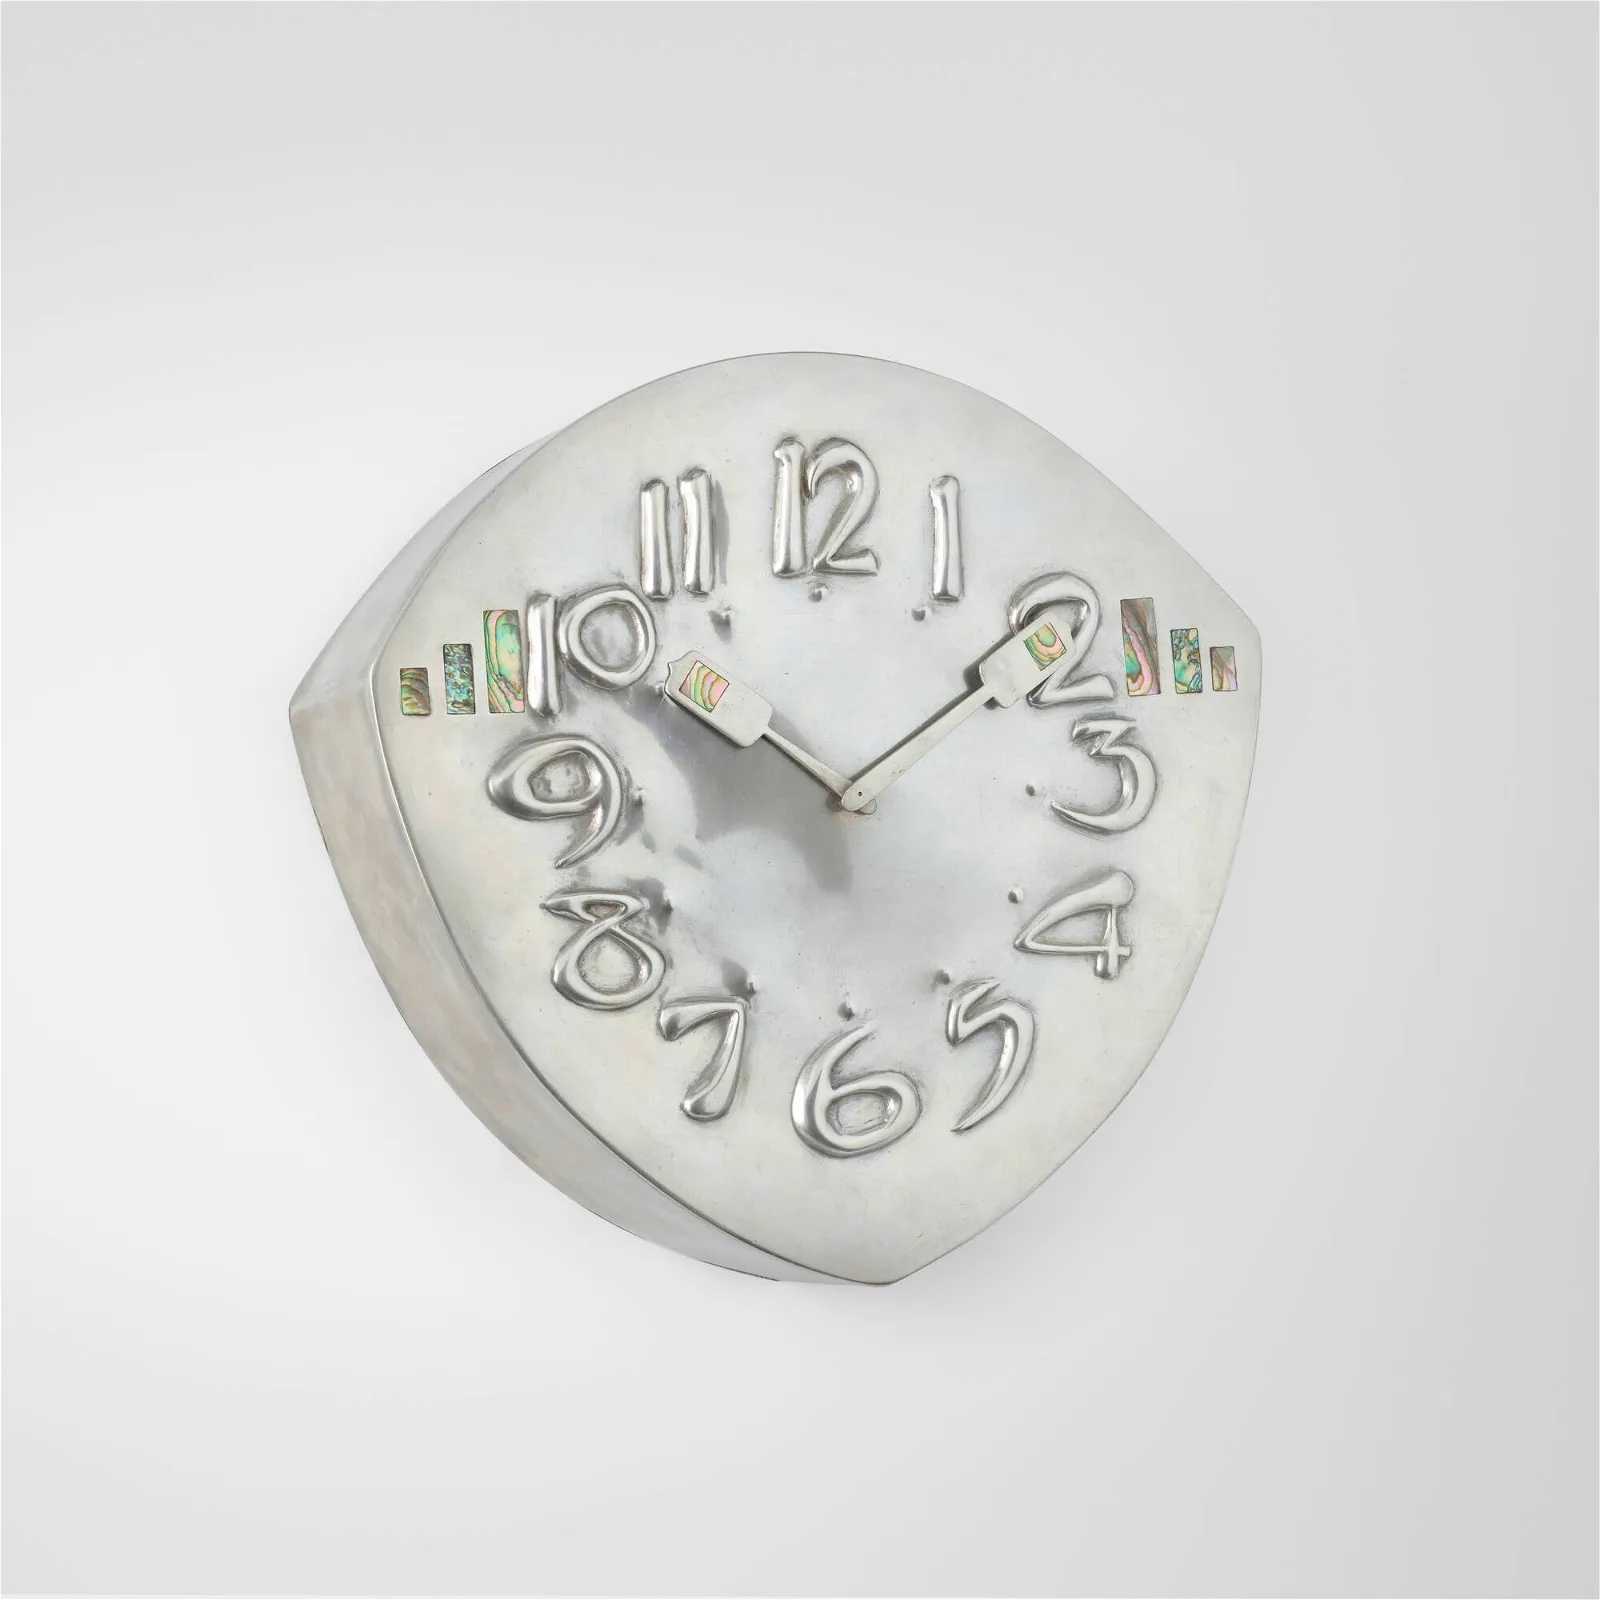 Archibald Knox Tudric wall clock, which sold for $11,000 ($14,410 with buyer’s premium) at Toomey.